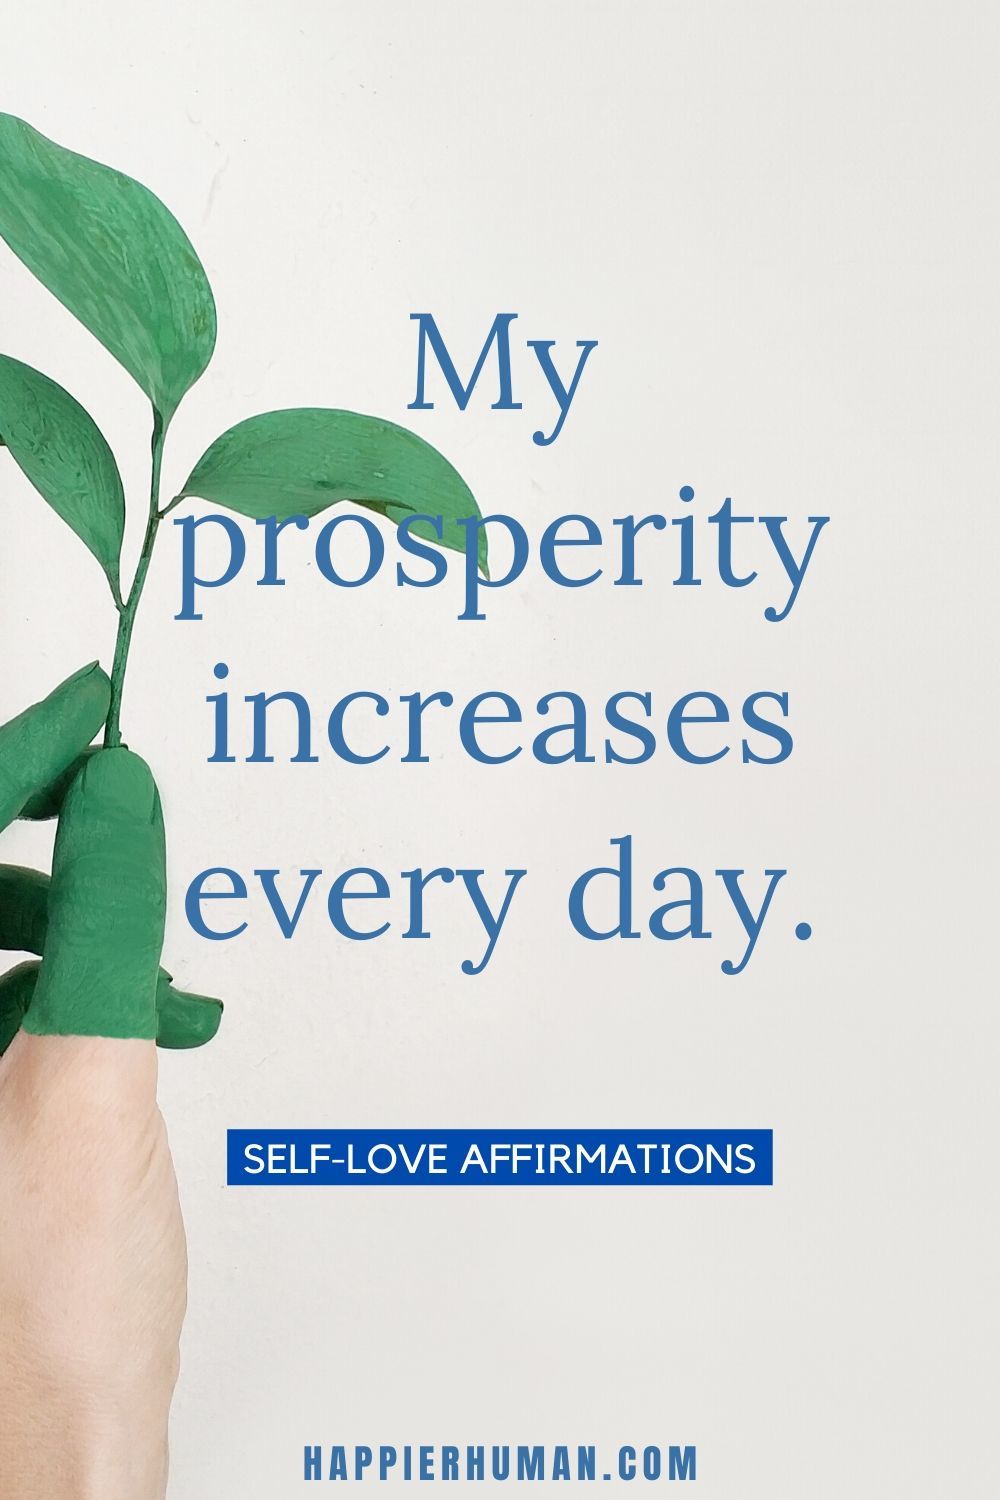 Self Love Affirmations - “My prosperity increases every day.” | self love affirmations louise hay | self love affirmations 2020 | affirmations for self love and healing #affirmationsdaily #affirmationstoactions #affirmationsweekly